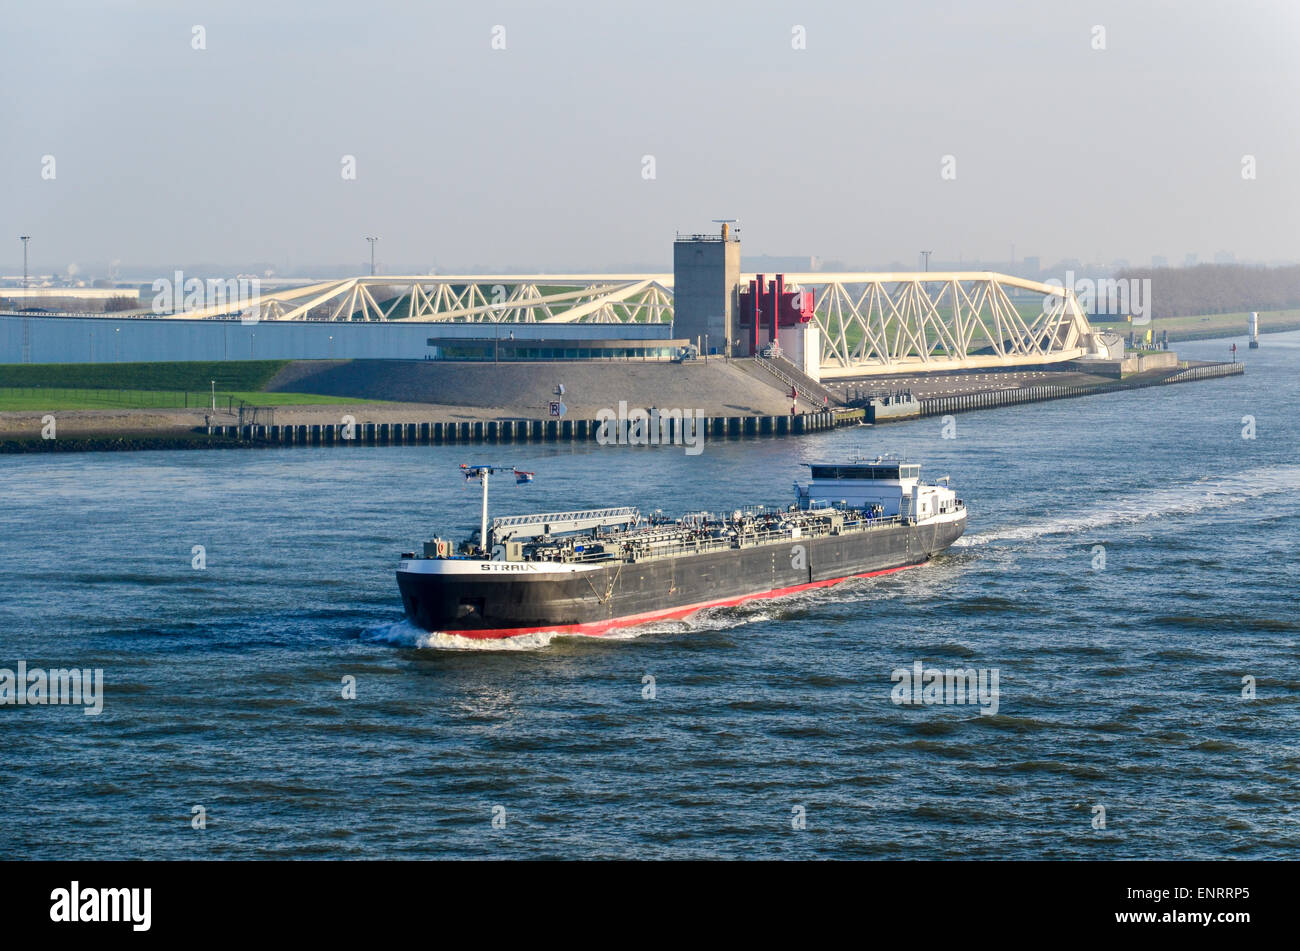 A chemical barge passing the Maeslantkering on the Nieuwe Waterweg, Rotterdam, a storm surge barrier Stock Photo